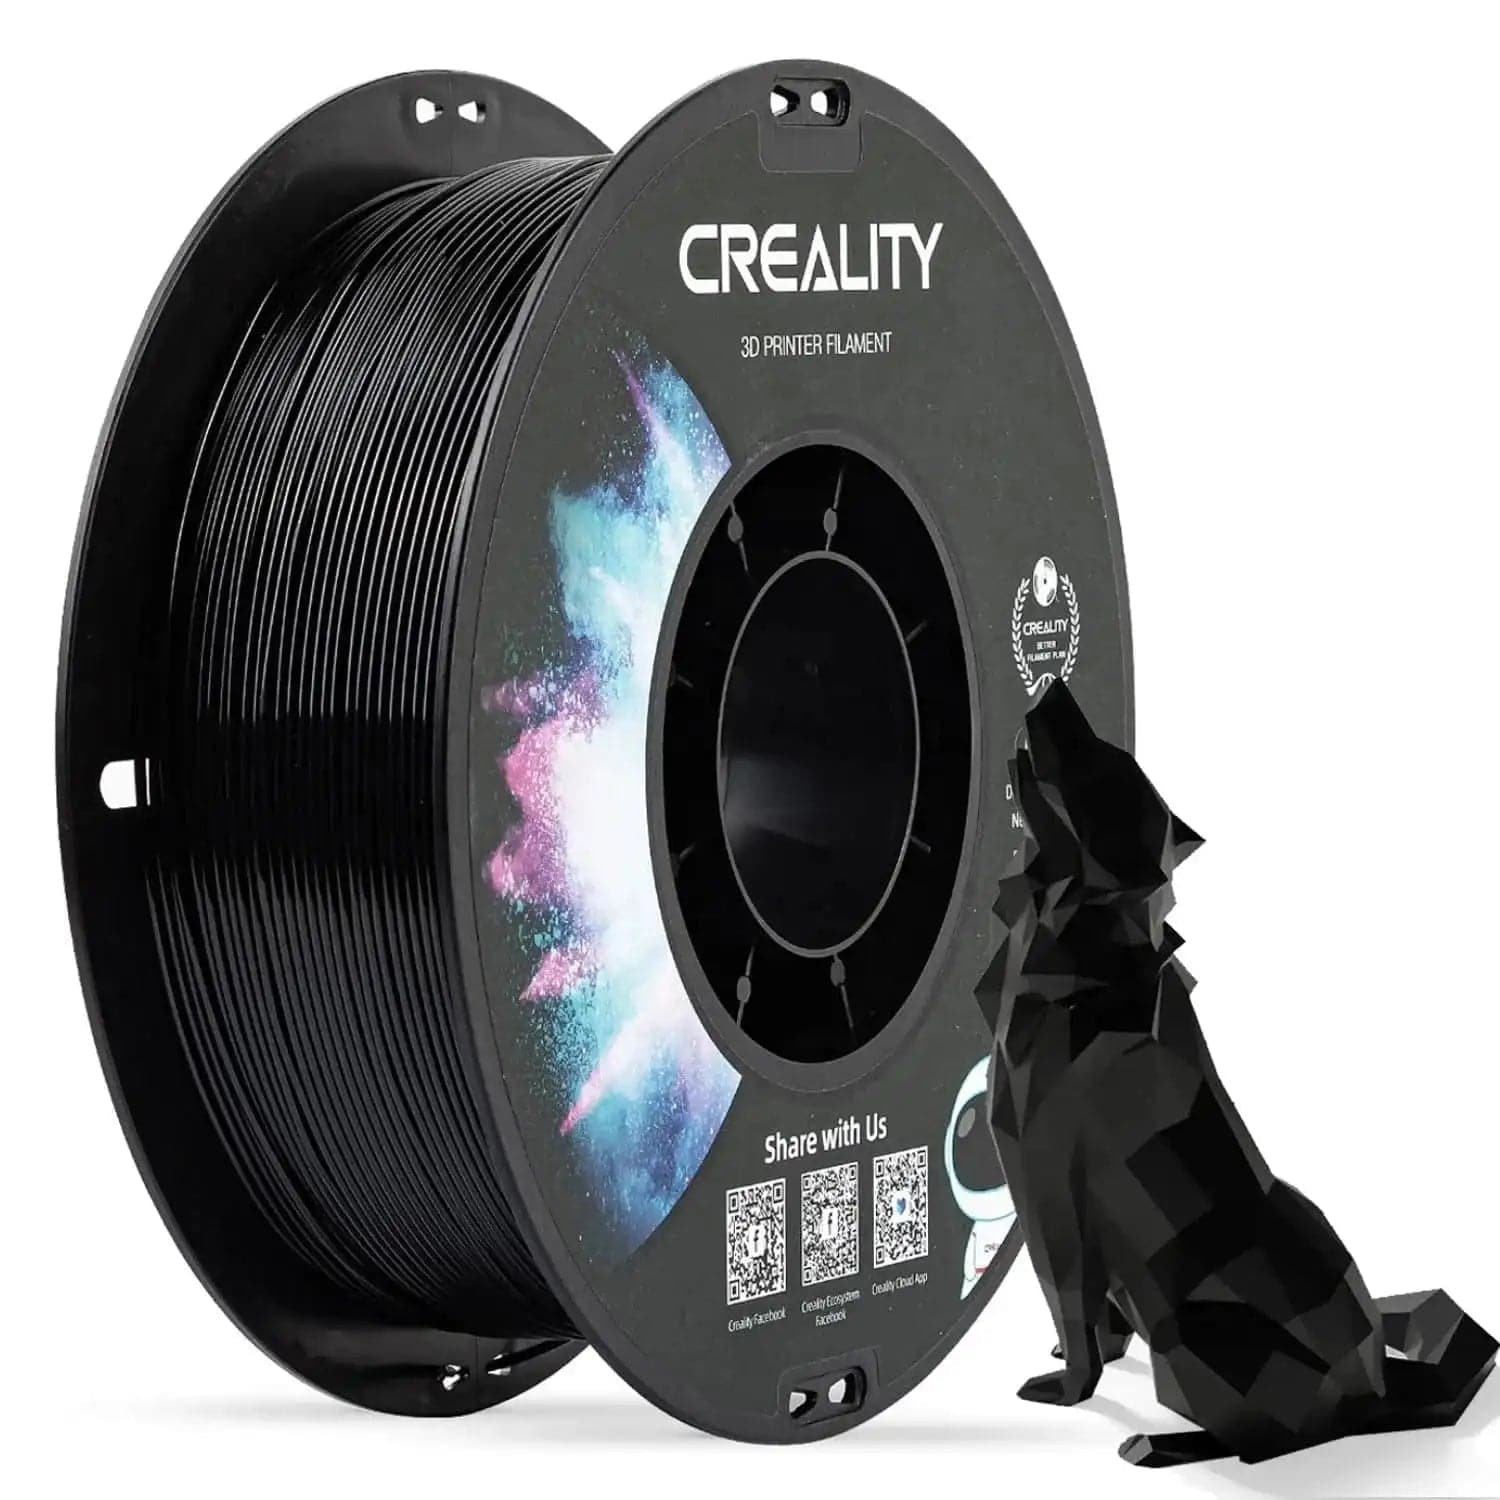 10kg Combo Sale-Creality PETG Filament 1.75mm 1KGFeatures:

【Ship From Amazon FBA Warehouse】Same shipping service with Amazon. Enjoy reliable performance and fast shipping with the Amazon FBA Warehouse.
【Creality Q10kg Combo Sale-Creality PETG Filament 13D Printing Materials